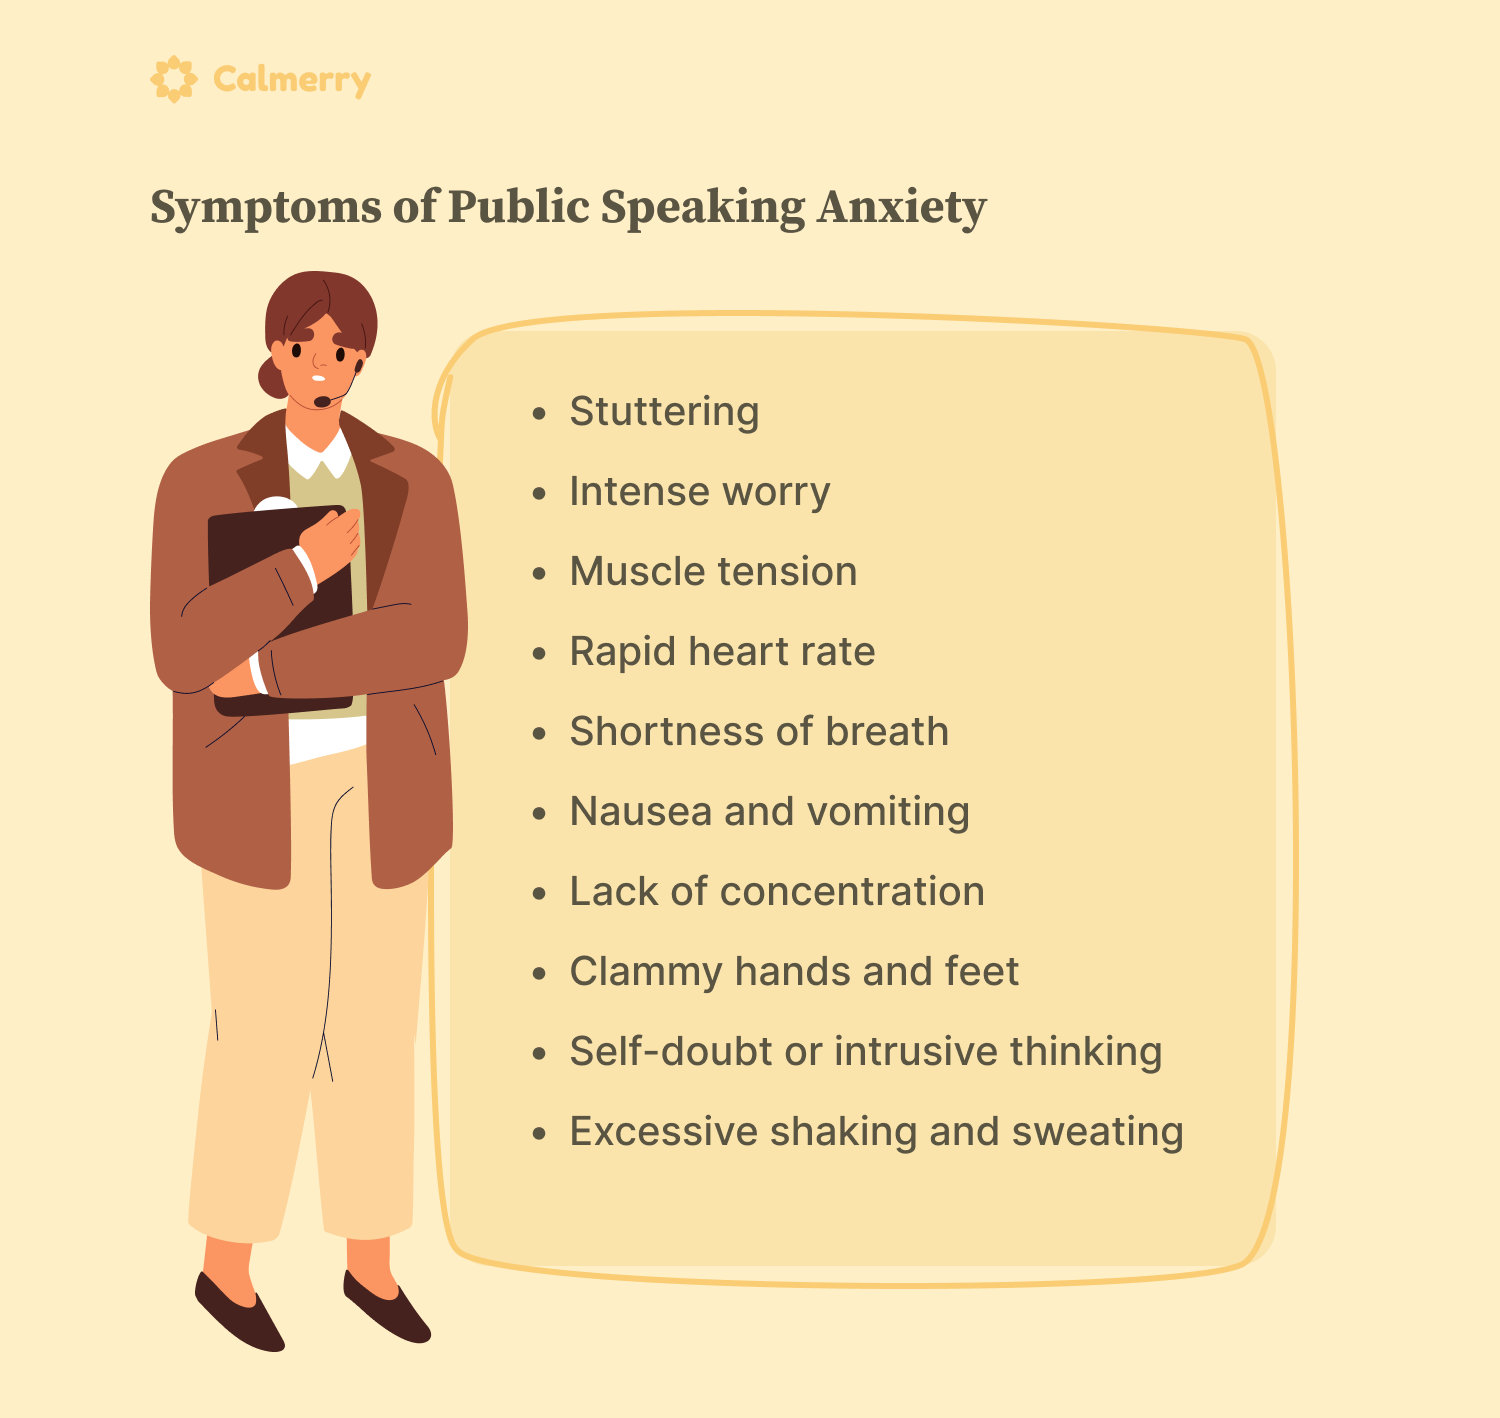 everyone experiences public speaking anxiety differently, but there are a few common symptoms that are worth mentioning